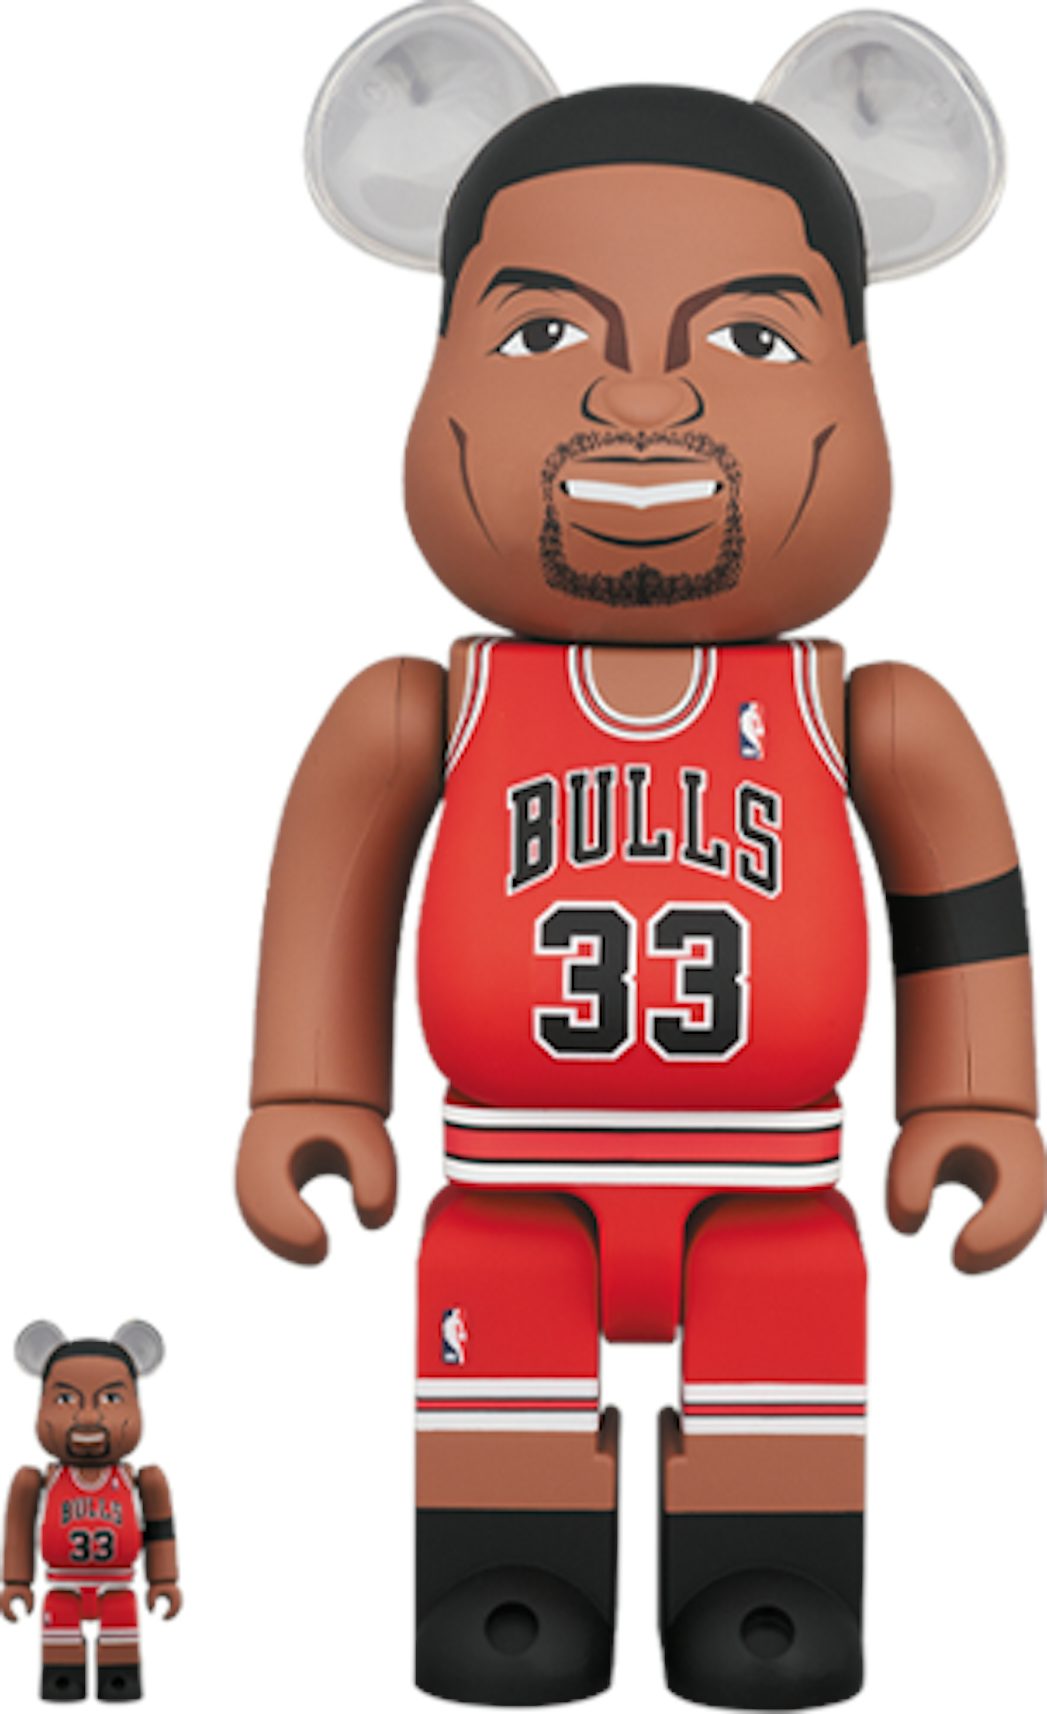 Scottie Pippen Chicago Bulls - BE@RBRICK / BE@RBRICK / Figures and